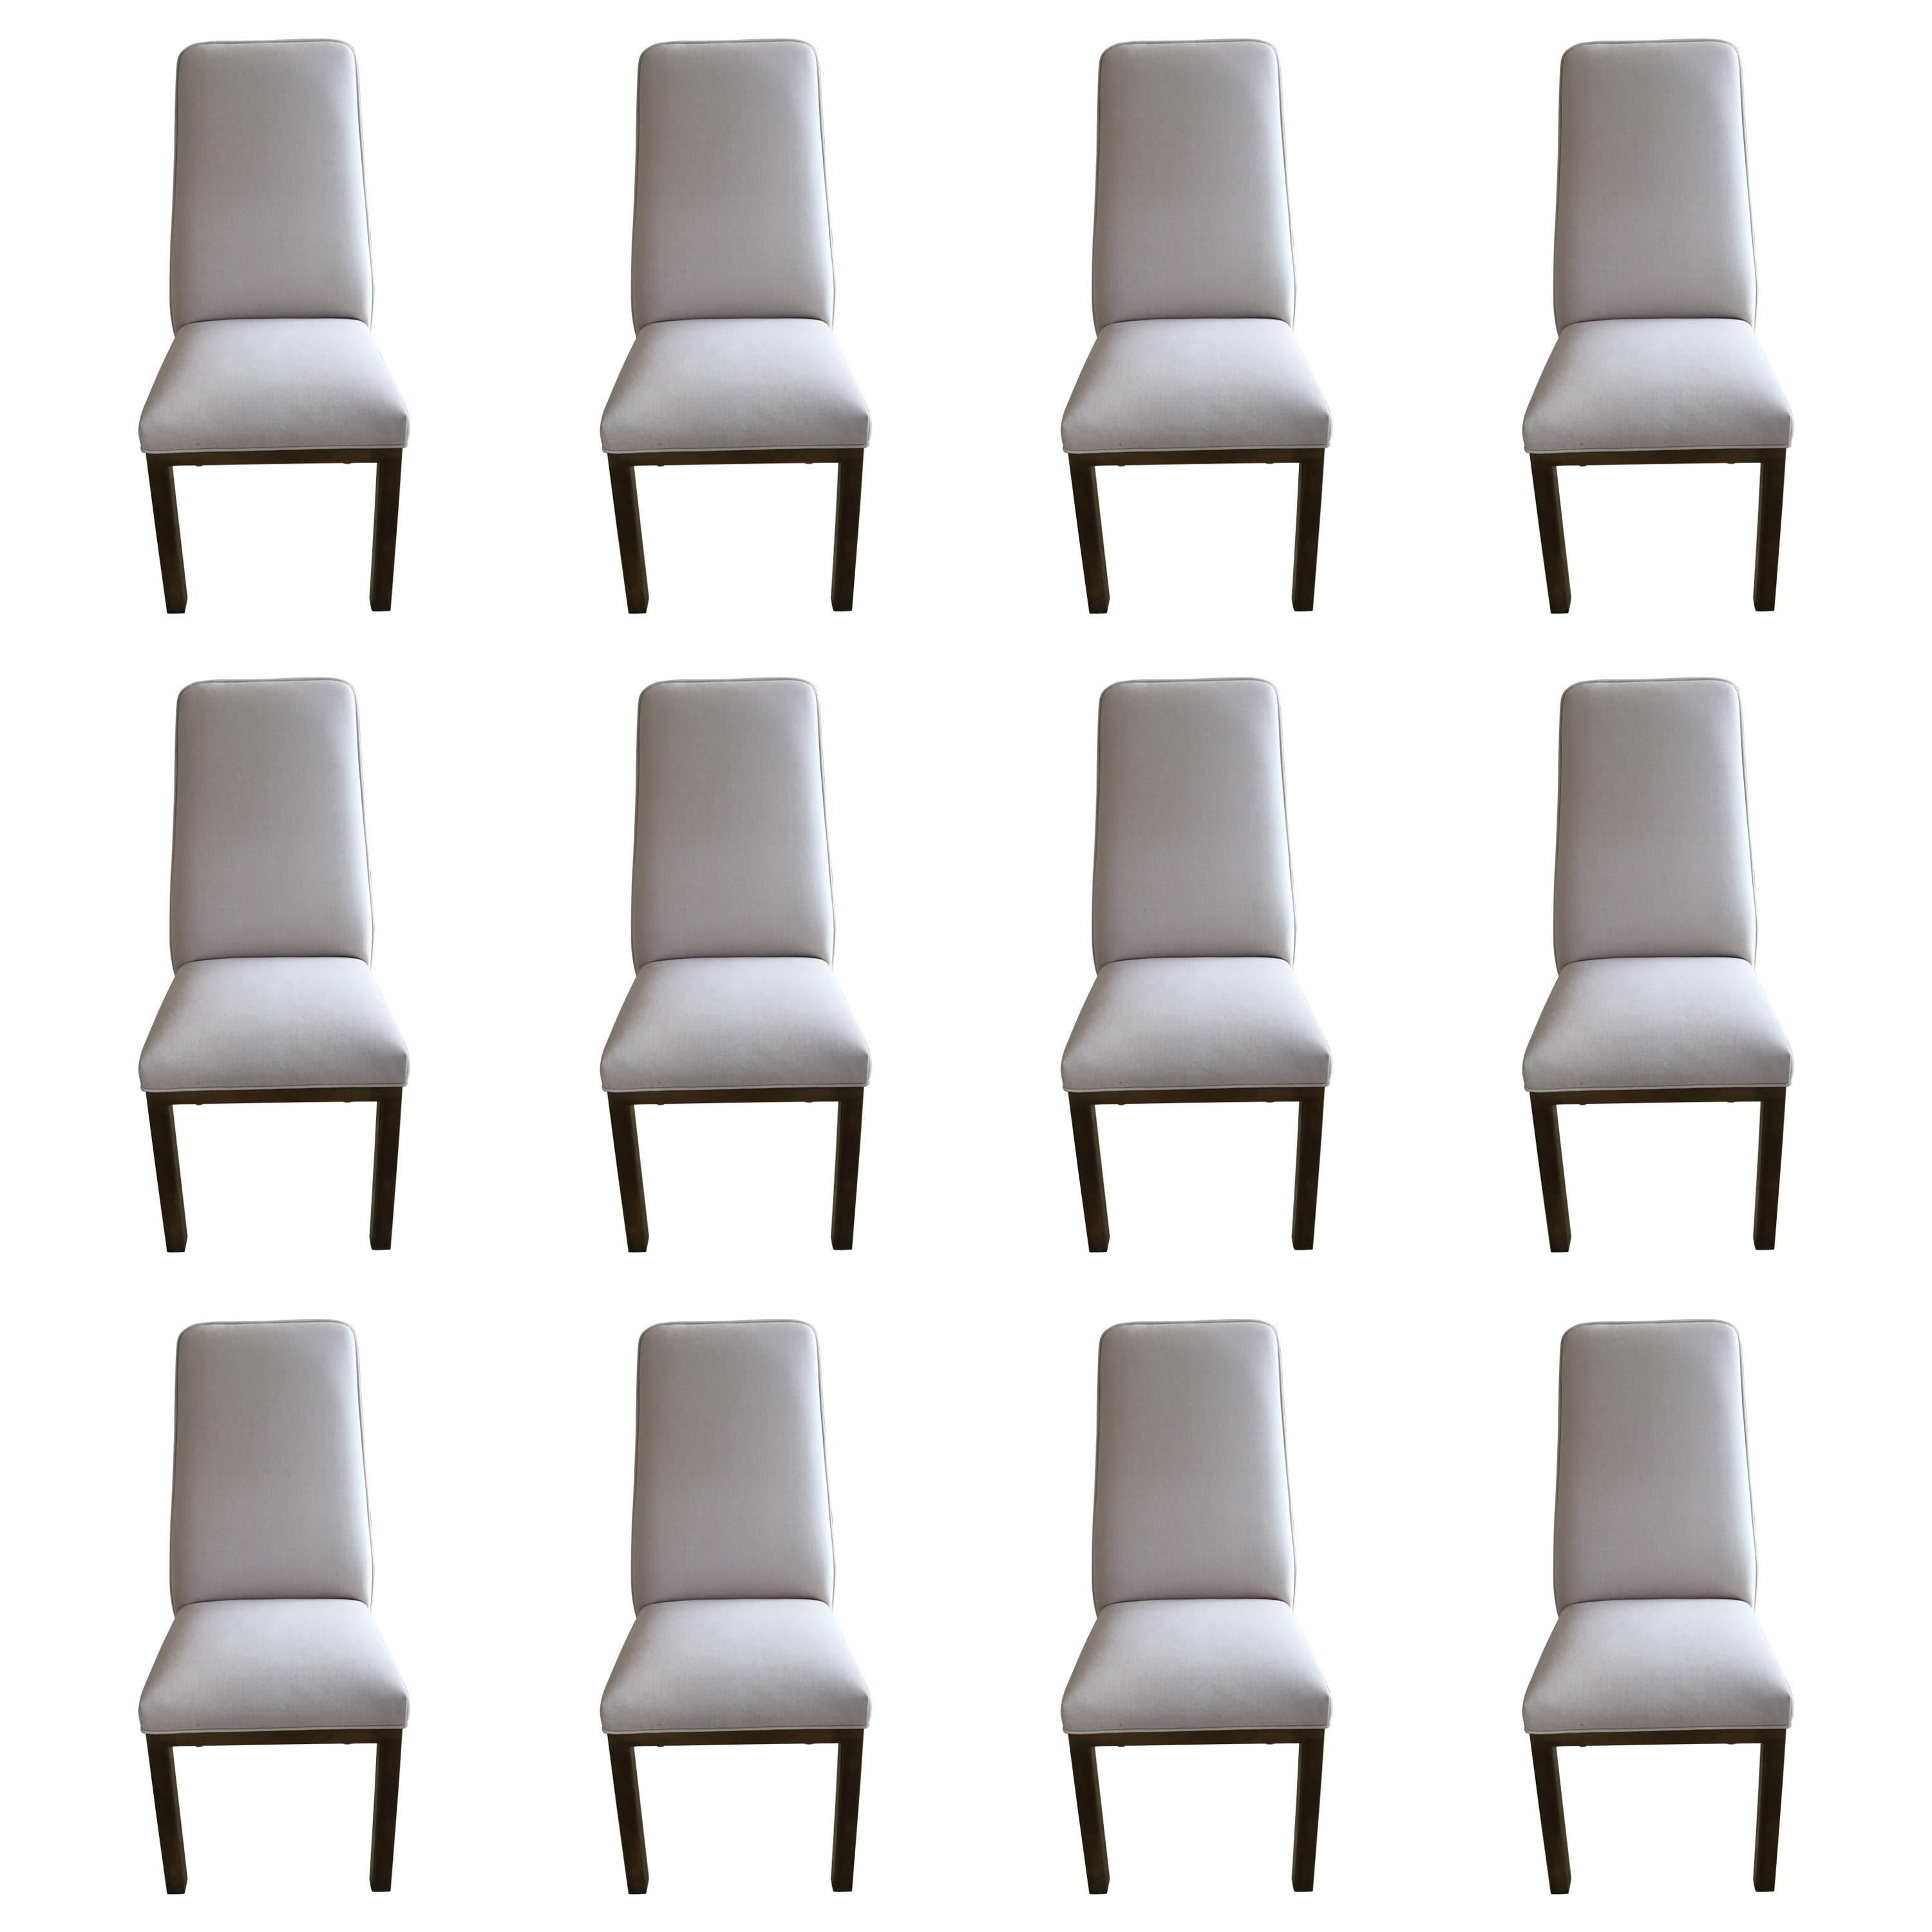 12 Mastercraft Dining Room Chairs with Bronze Finished Legs For Sale